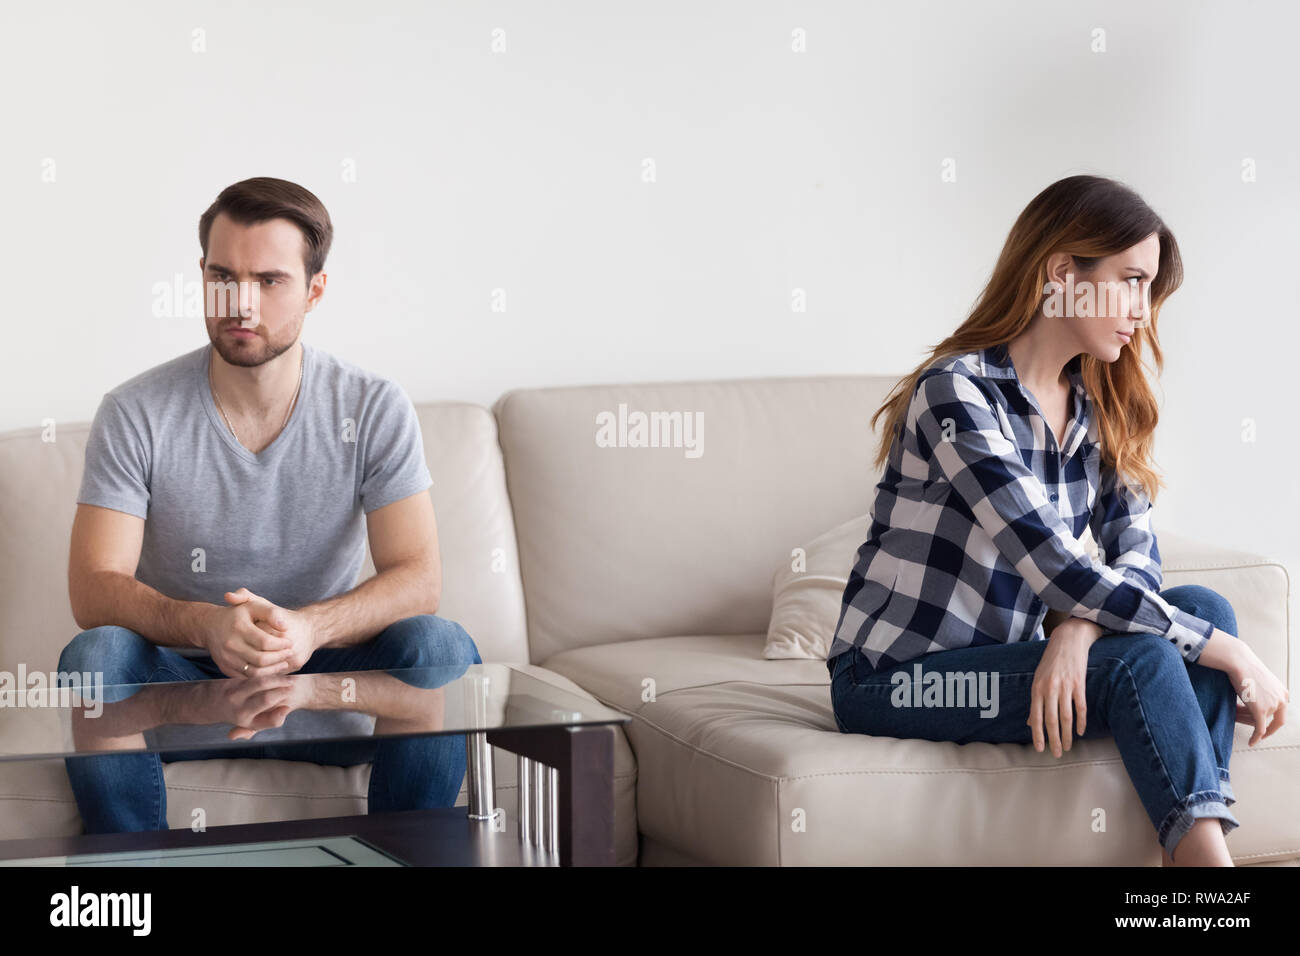 Unhappy stubborn married couple feel angry frustrated sitting on couch Stock Photo